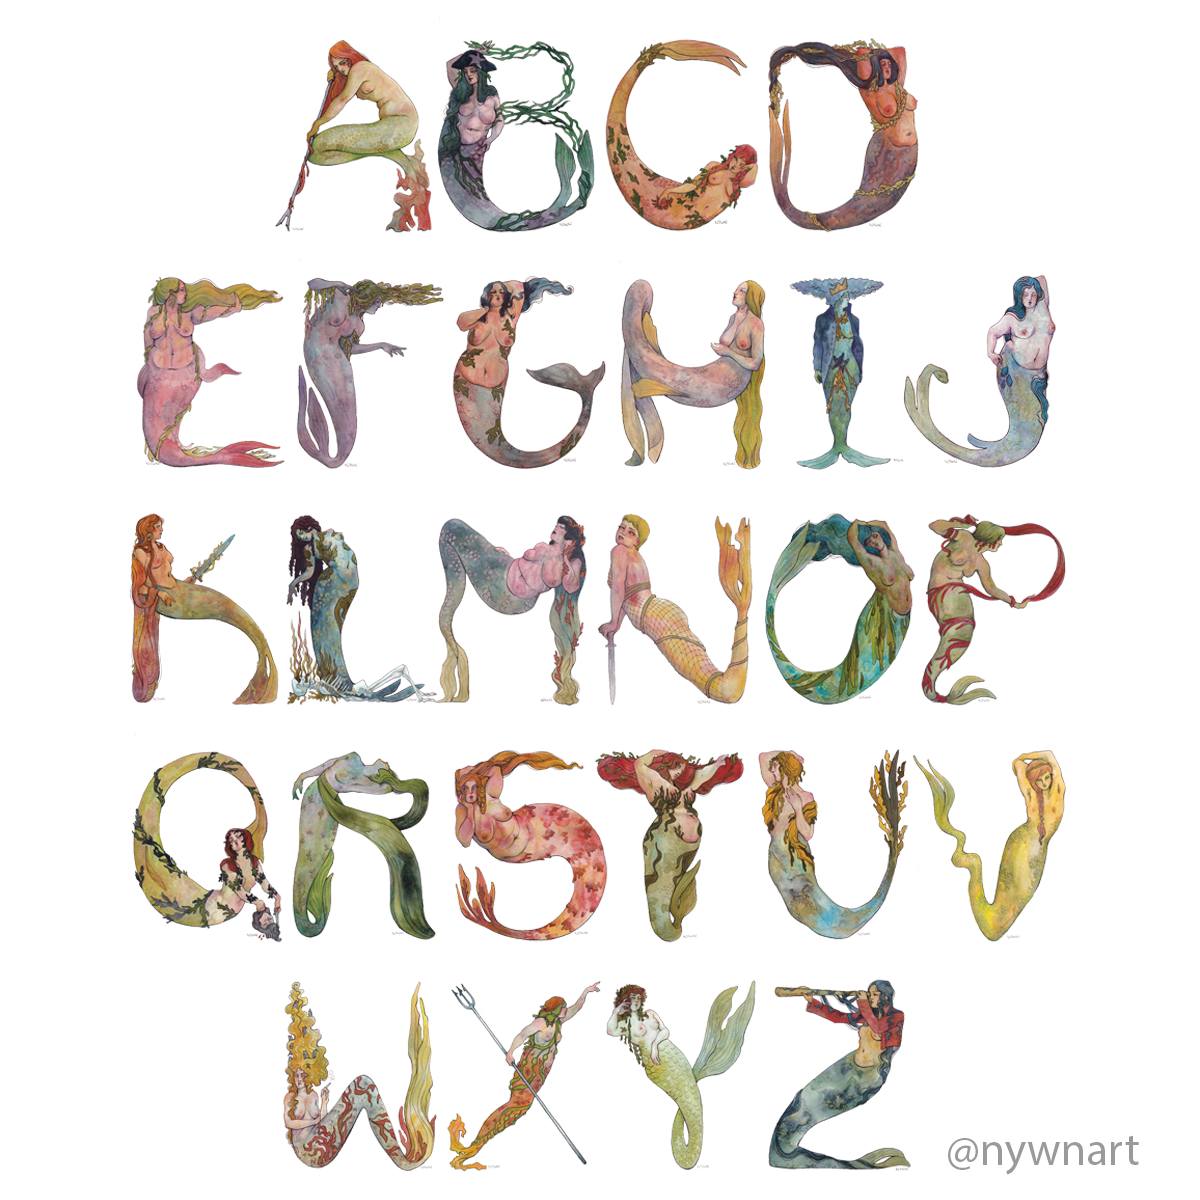 The Whole Mermaid Alphabet!

Prints and originals available Friday morning at 8am PST

Three years in the making. It all